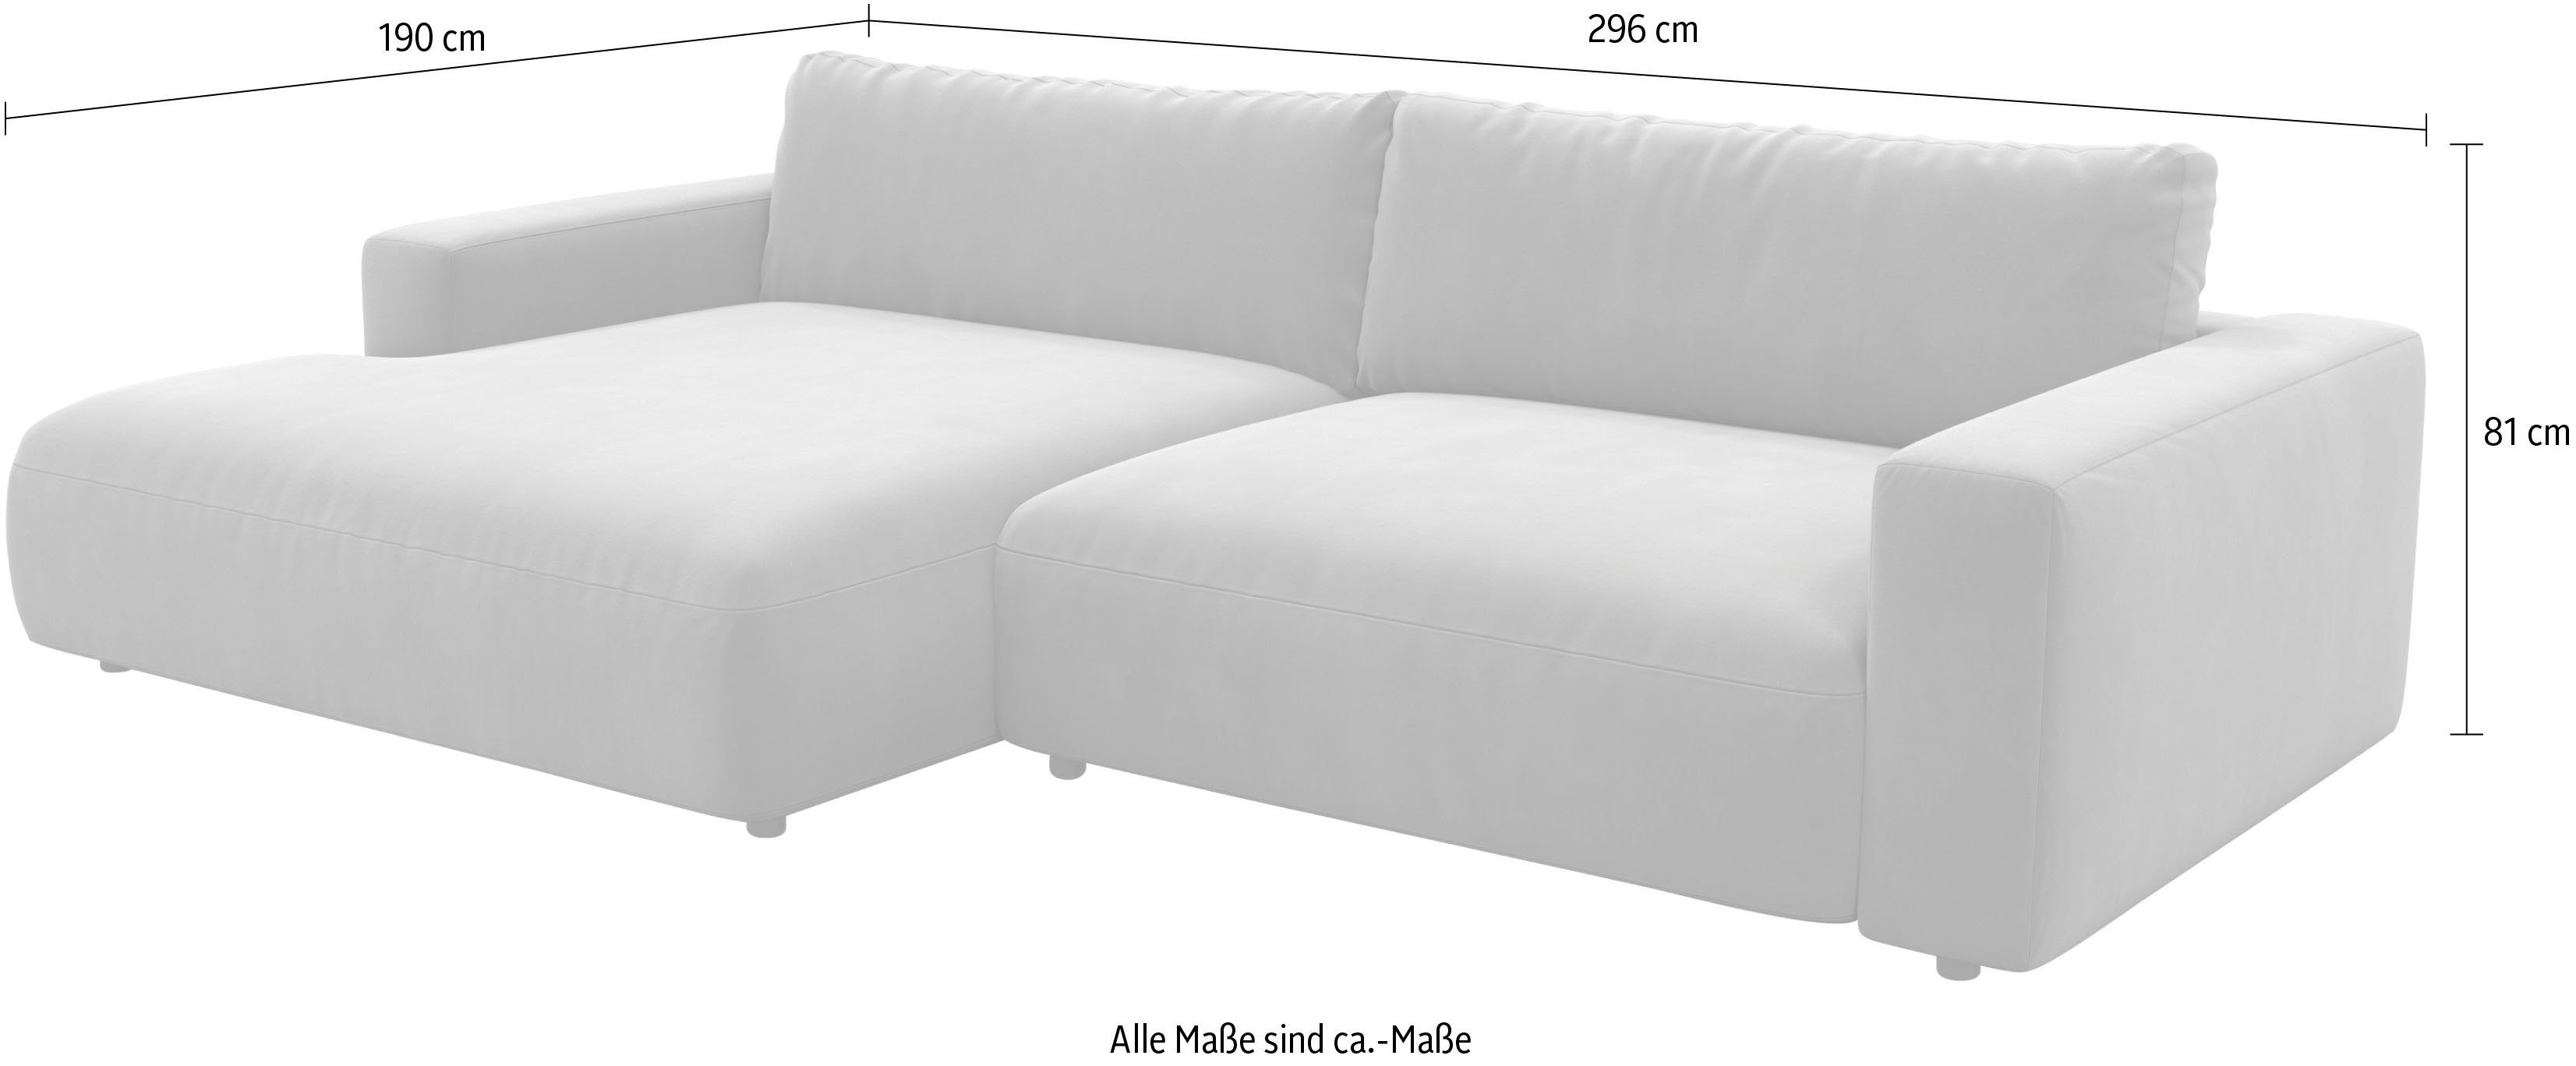 GALLERY LUCIA M Ecksofa by Musterring branded